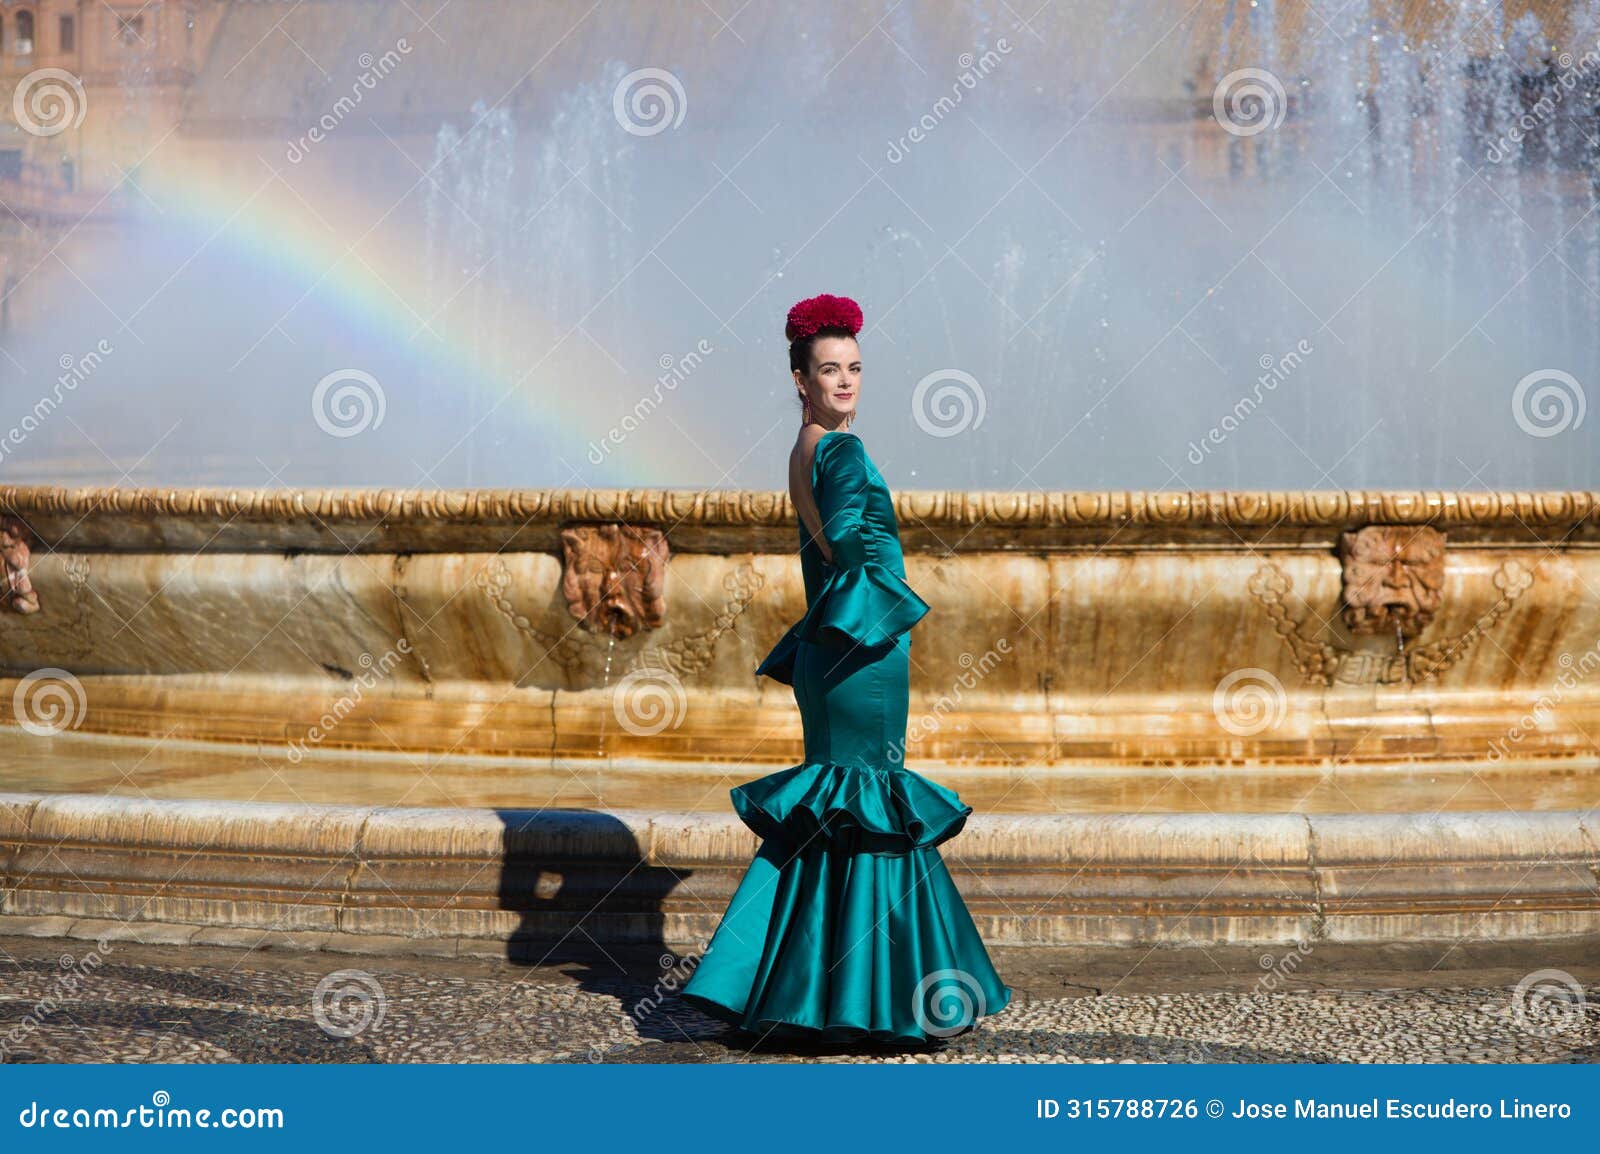 beautiful young woman in a green frilly suit with a flower on her head. the woman is dancing flamenco and is in the most famous